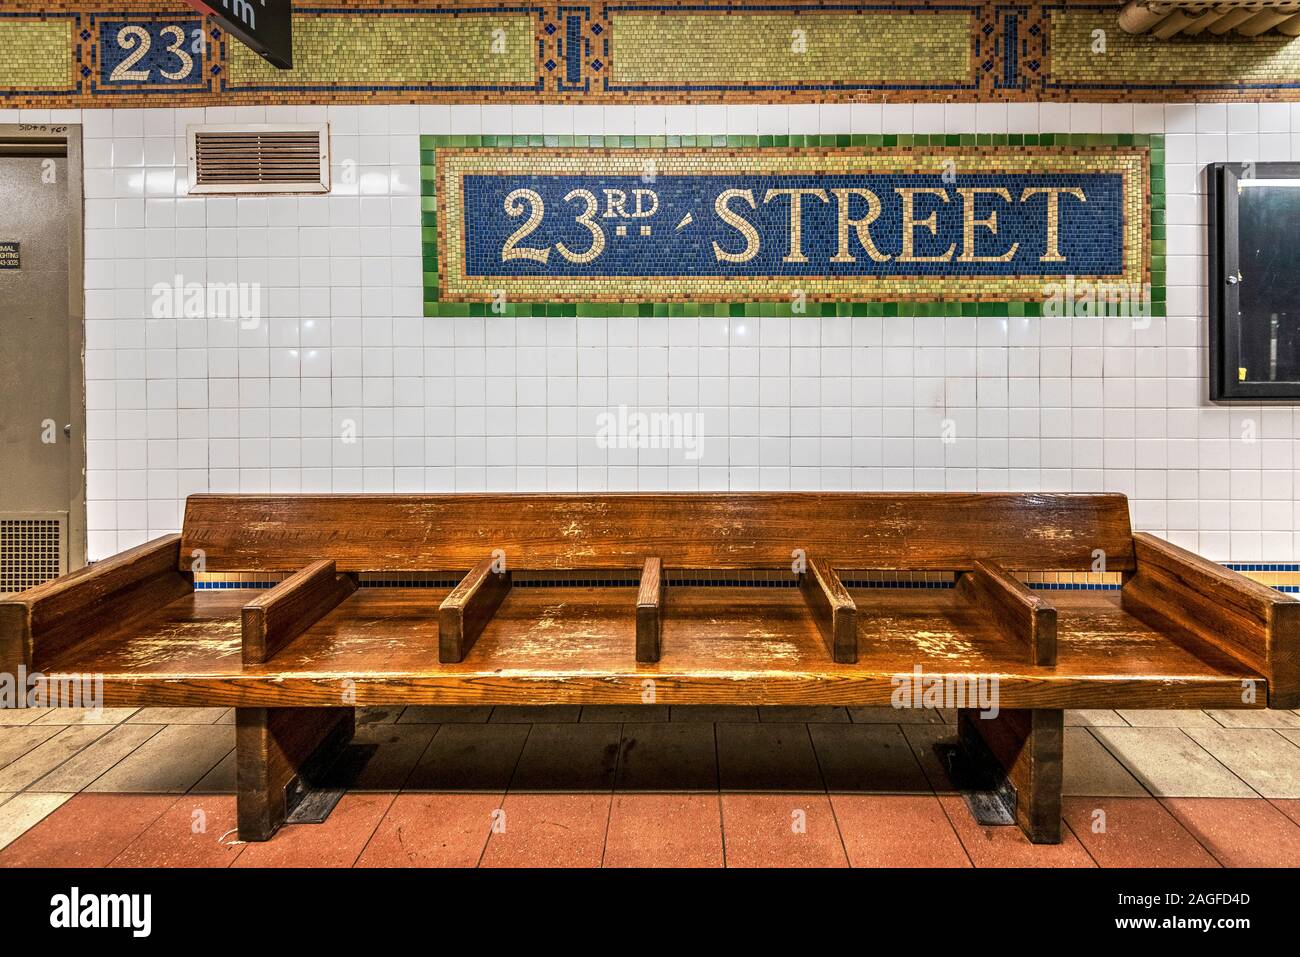 Old wooden bench and vintage subway sign at 23rd street subway station, Manhattan, New York, USA Stock Photo